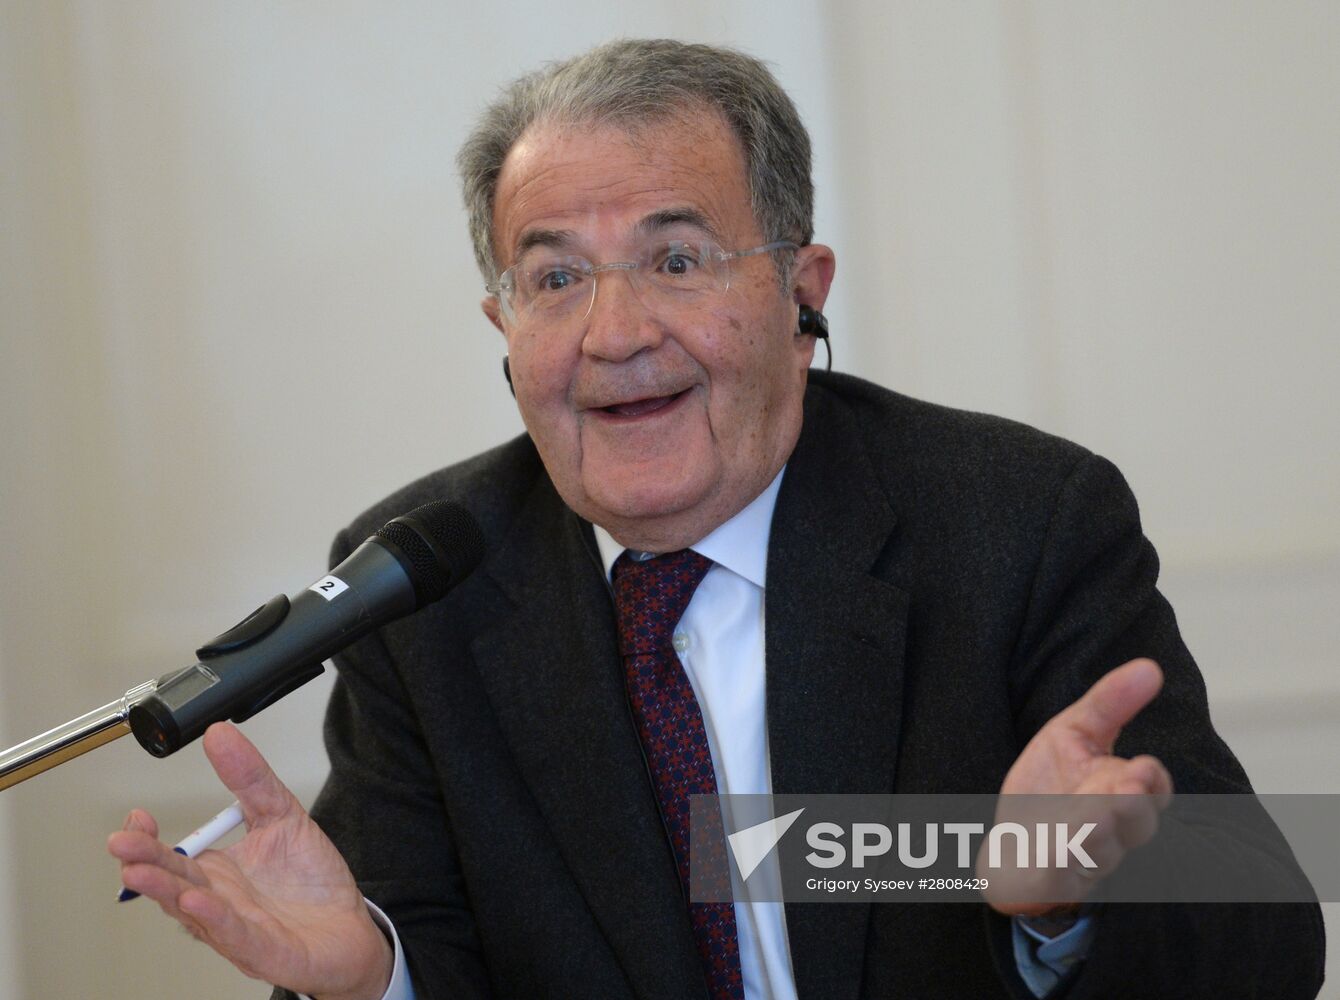 Lecture by Former Prime Minister of Italy Romano Prodi